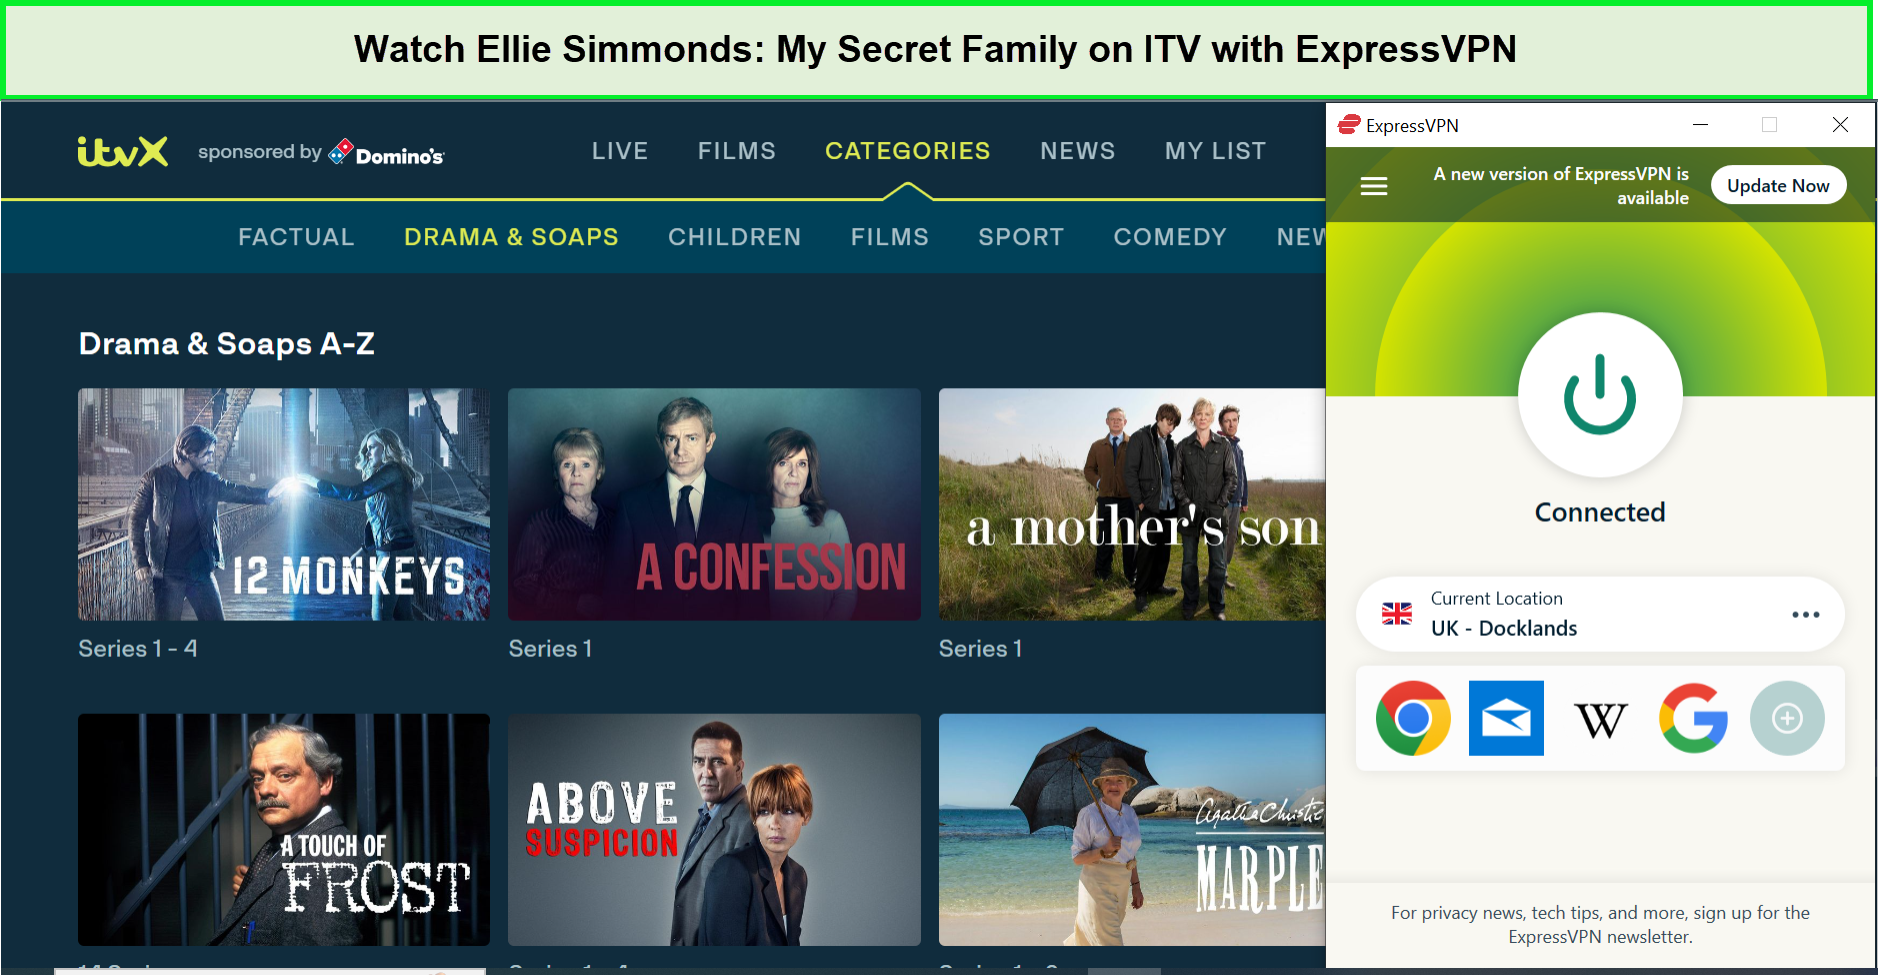 Watch-Ellie-Simmonds-My-Secret-Family-in-USA-on-ITV-with-ExpressVPN